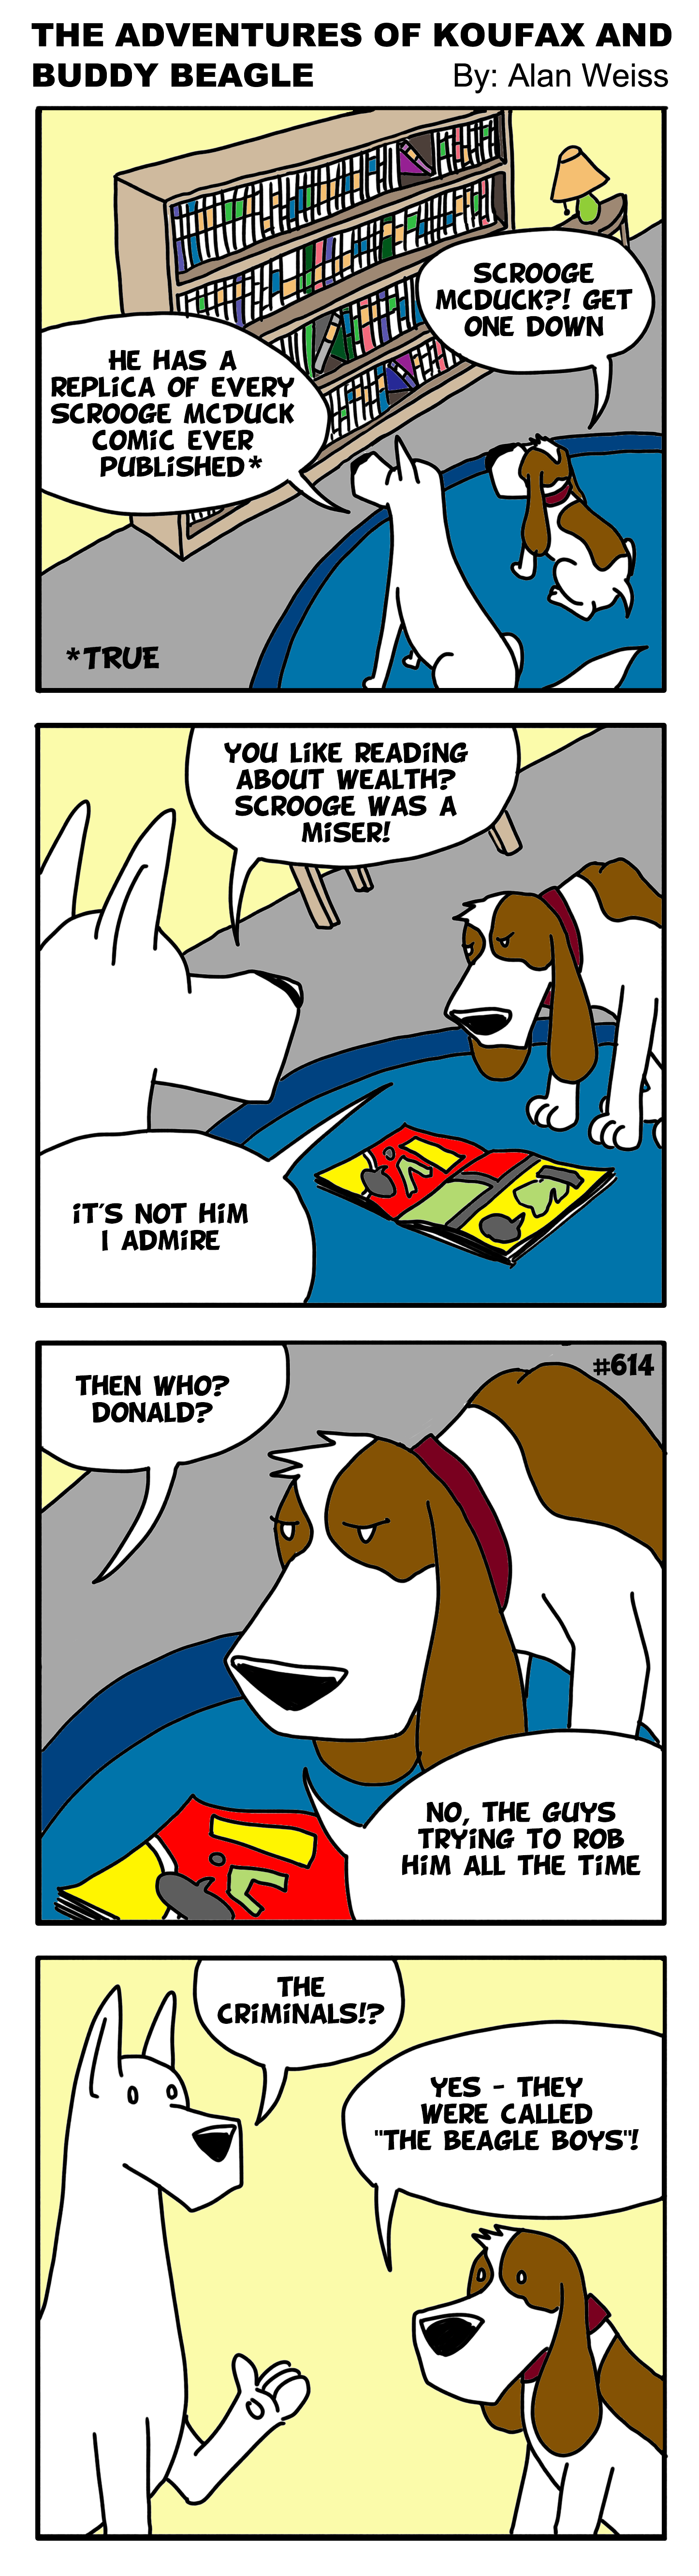 The Adventures of Koufax and Buddy Beagle #613